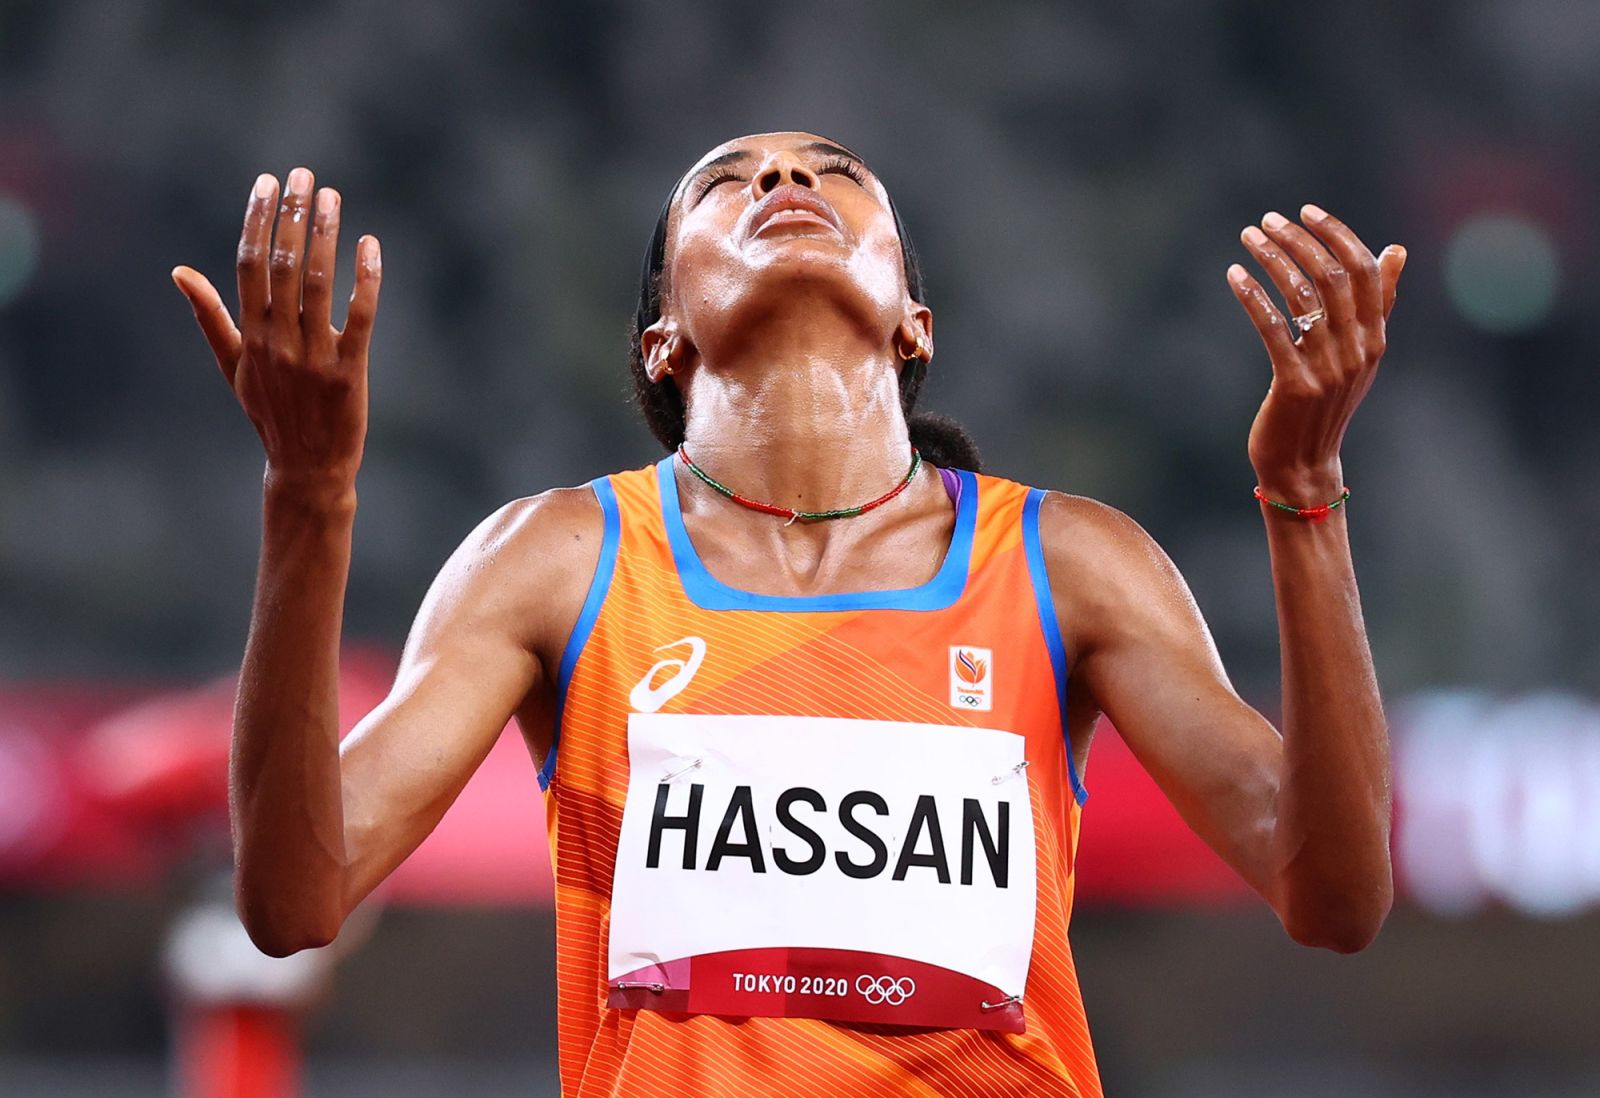 Dutch runner Sifan Hassan celebrates after winning her 1,500-meter heat on Monday.